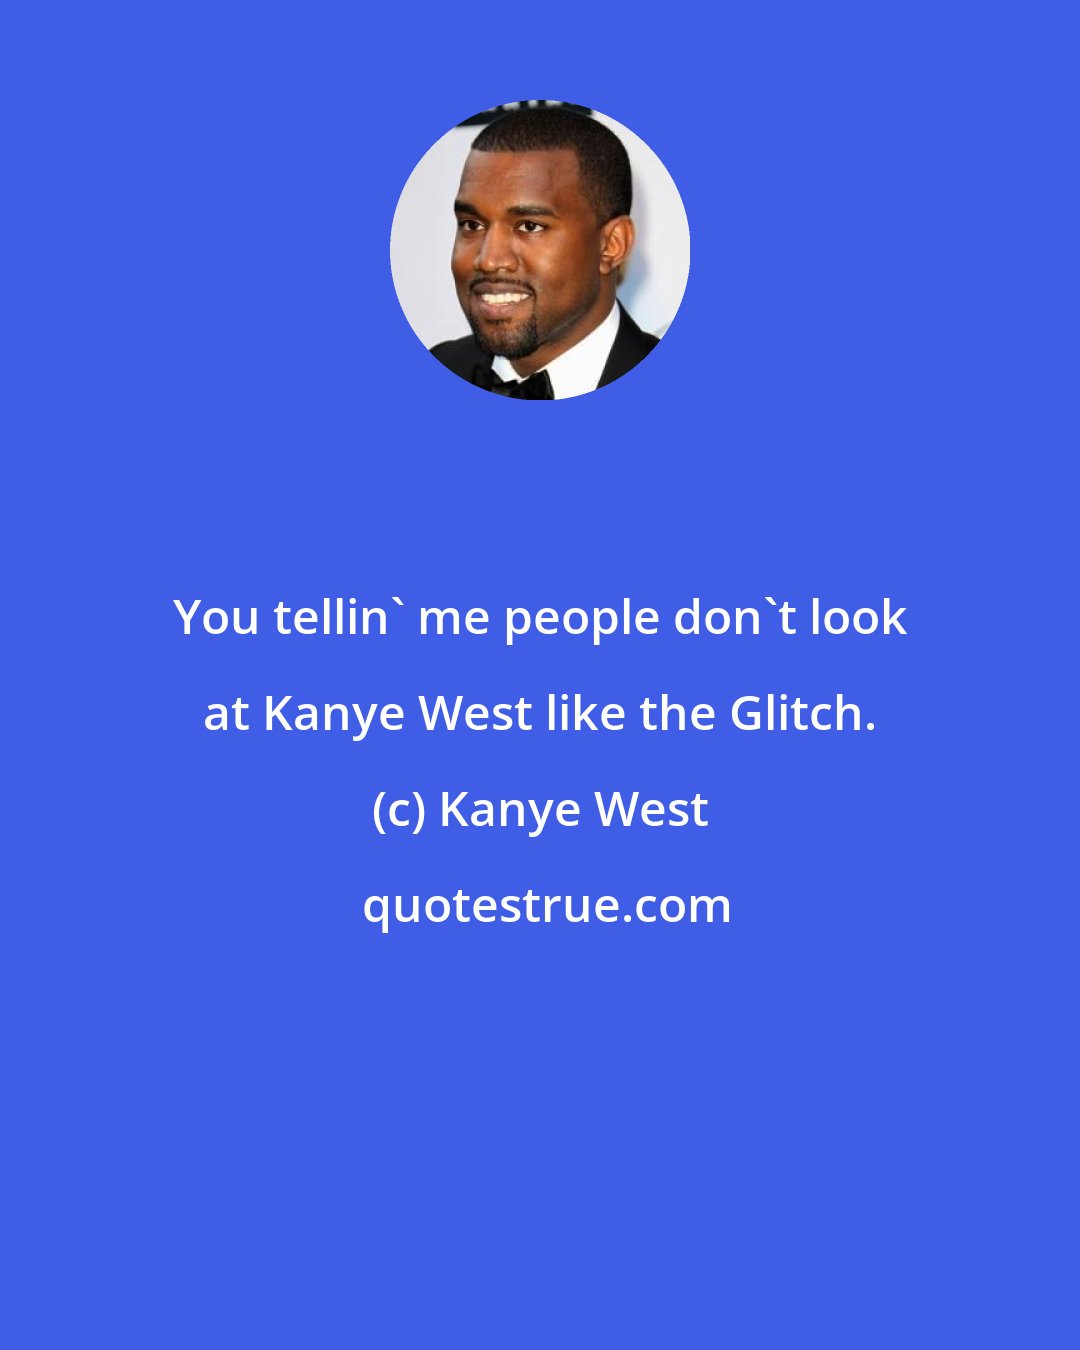 Kanye West: You tellin' me people don't look at Kanye West like the Glitch.